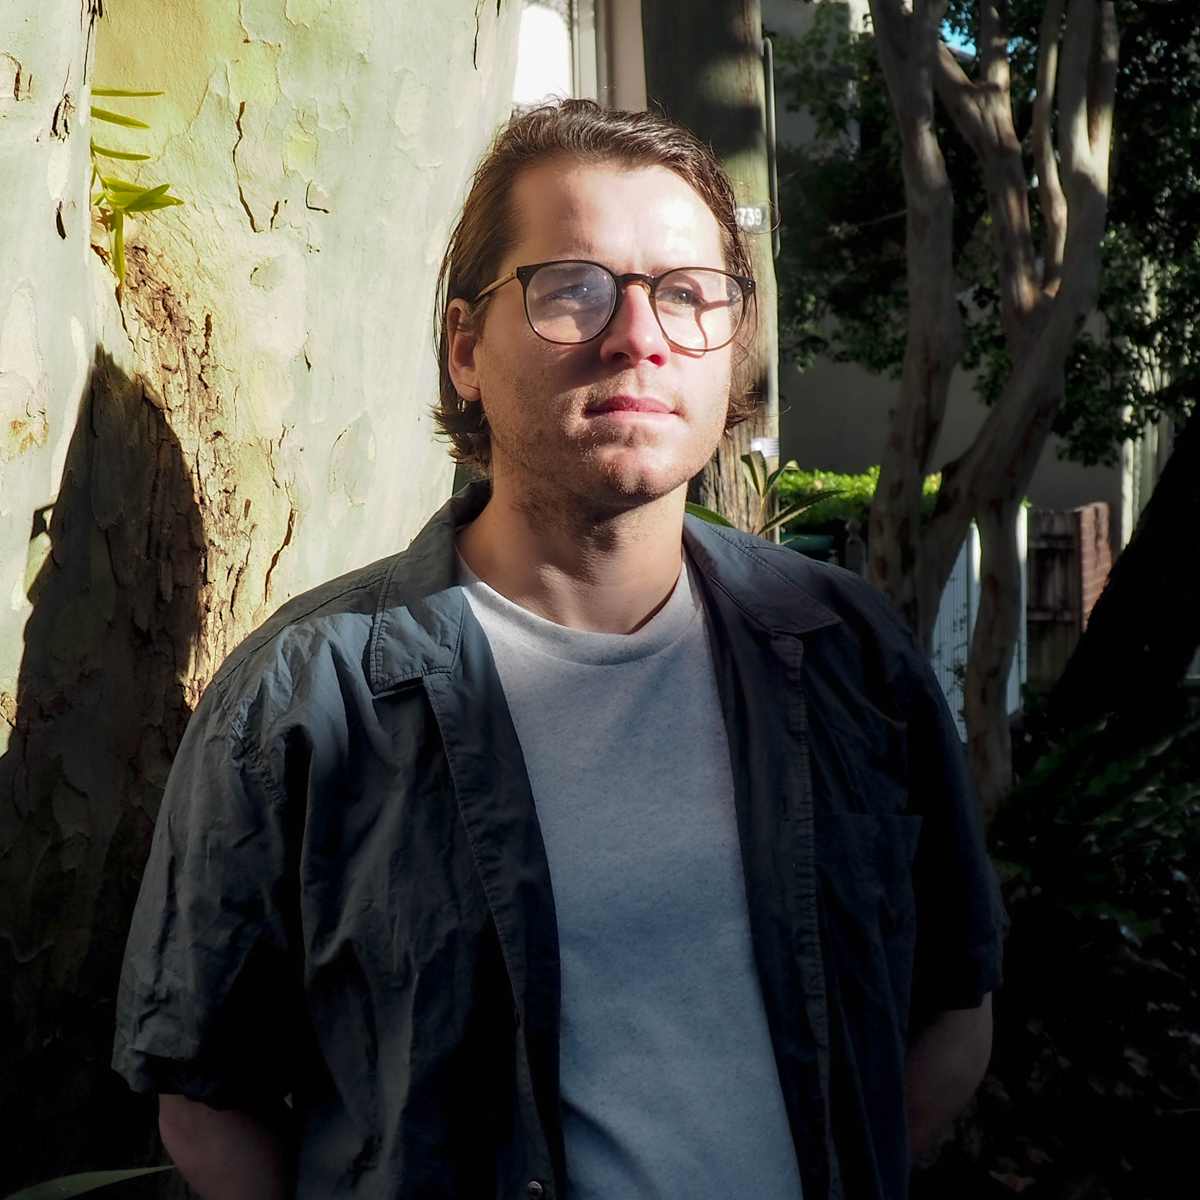 A headshot photograph of a man with shoulder length brown hair and glasses stands in front of a gum tree.